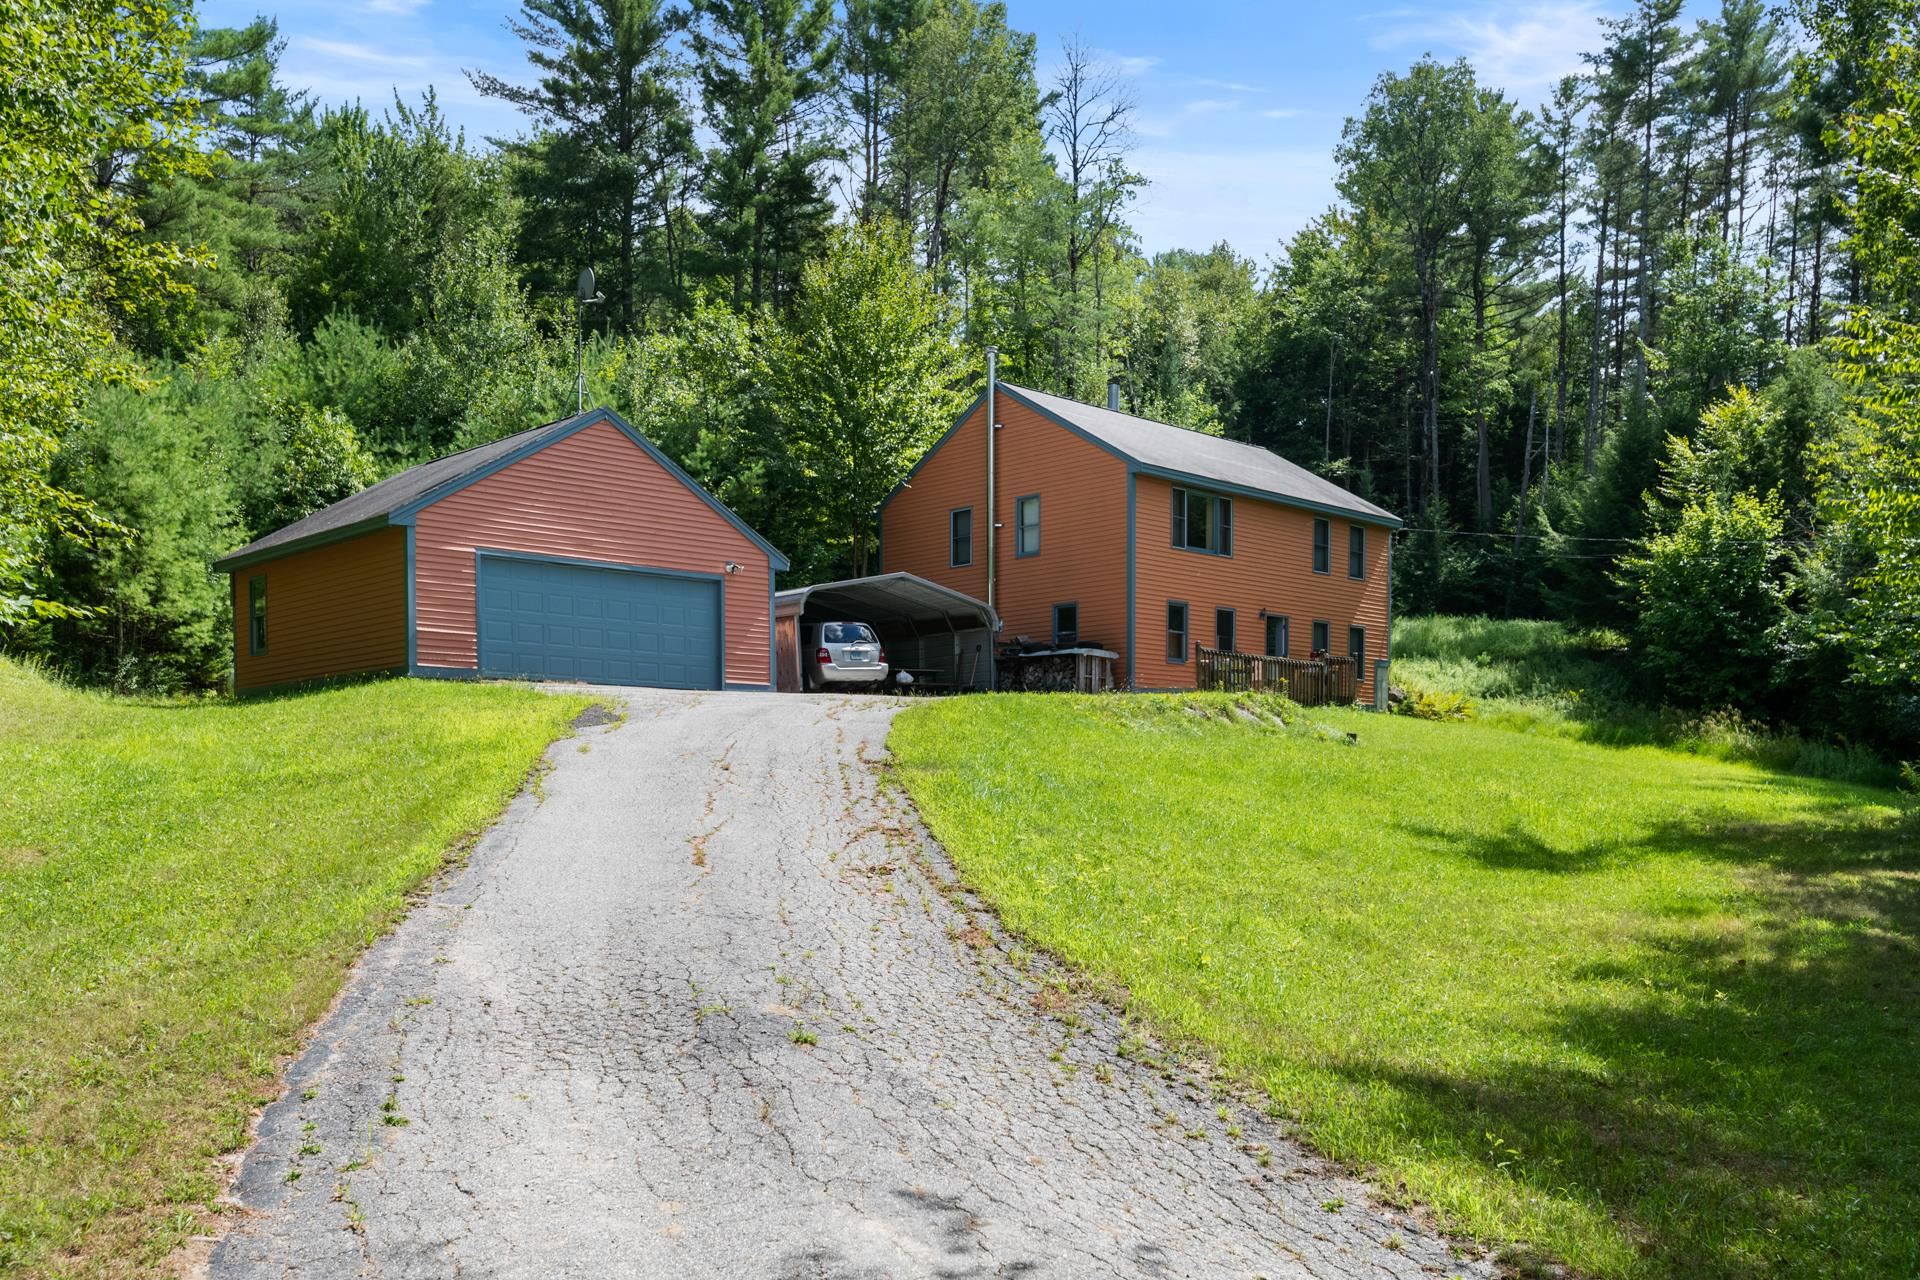 Sunapee NH 03782 Home for sale $List Price is $325,000